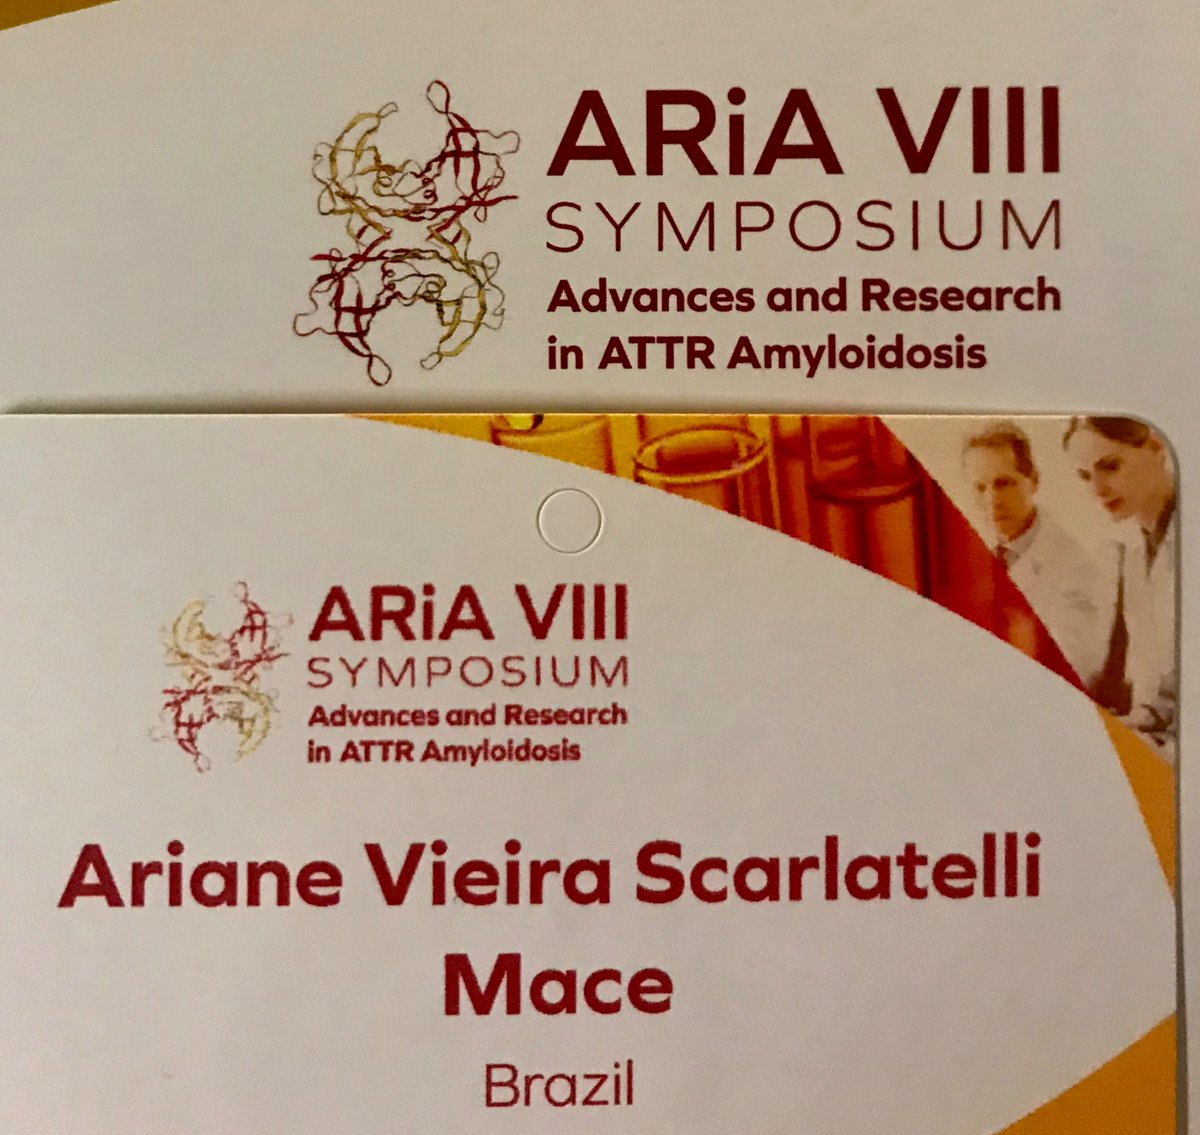 🇧🇷✈️🇳🇱 landed at Amsterdam to learn more about ATTR ! Excited to present a challenging clinical case during the poster session! #amyloidosis #ATTR #ARiA2019